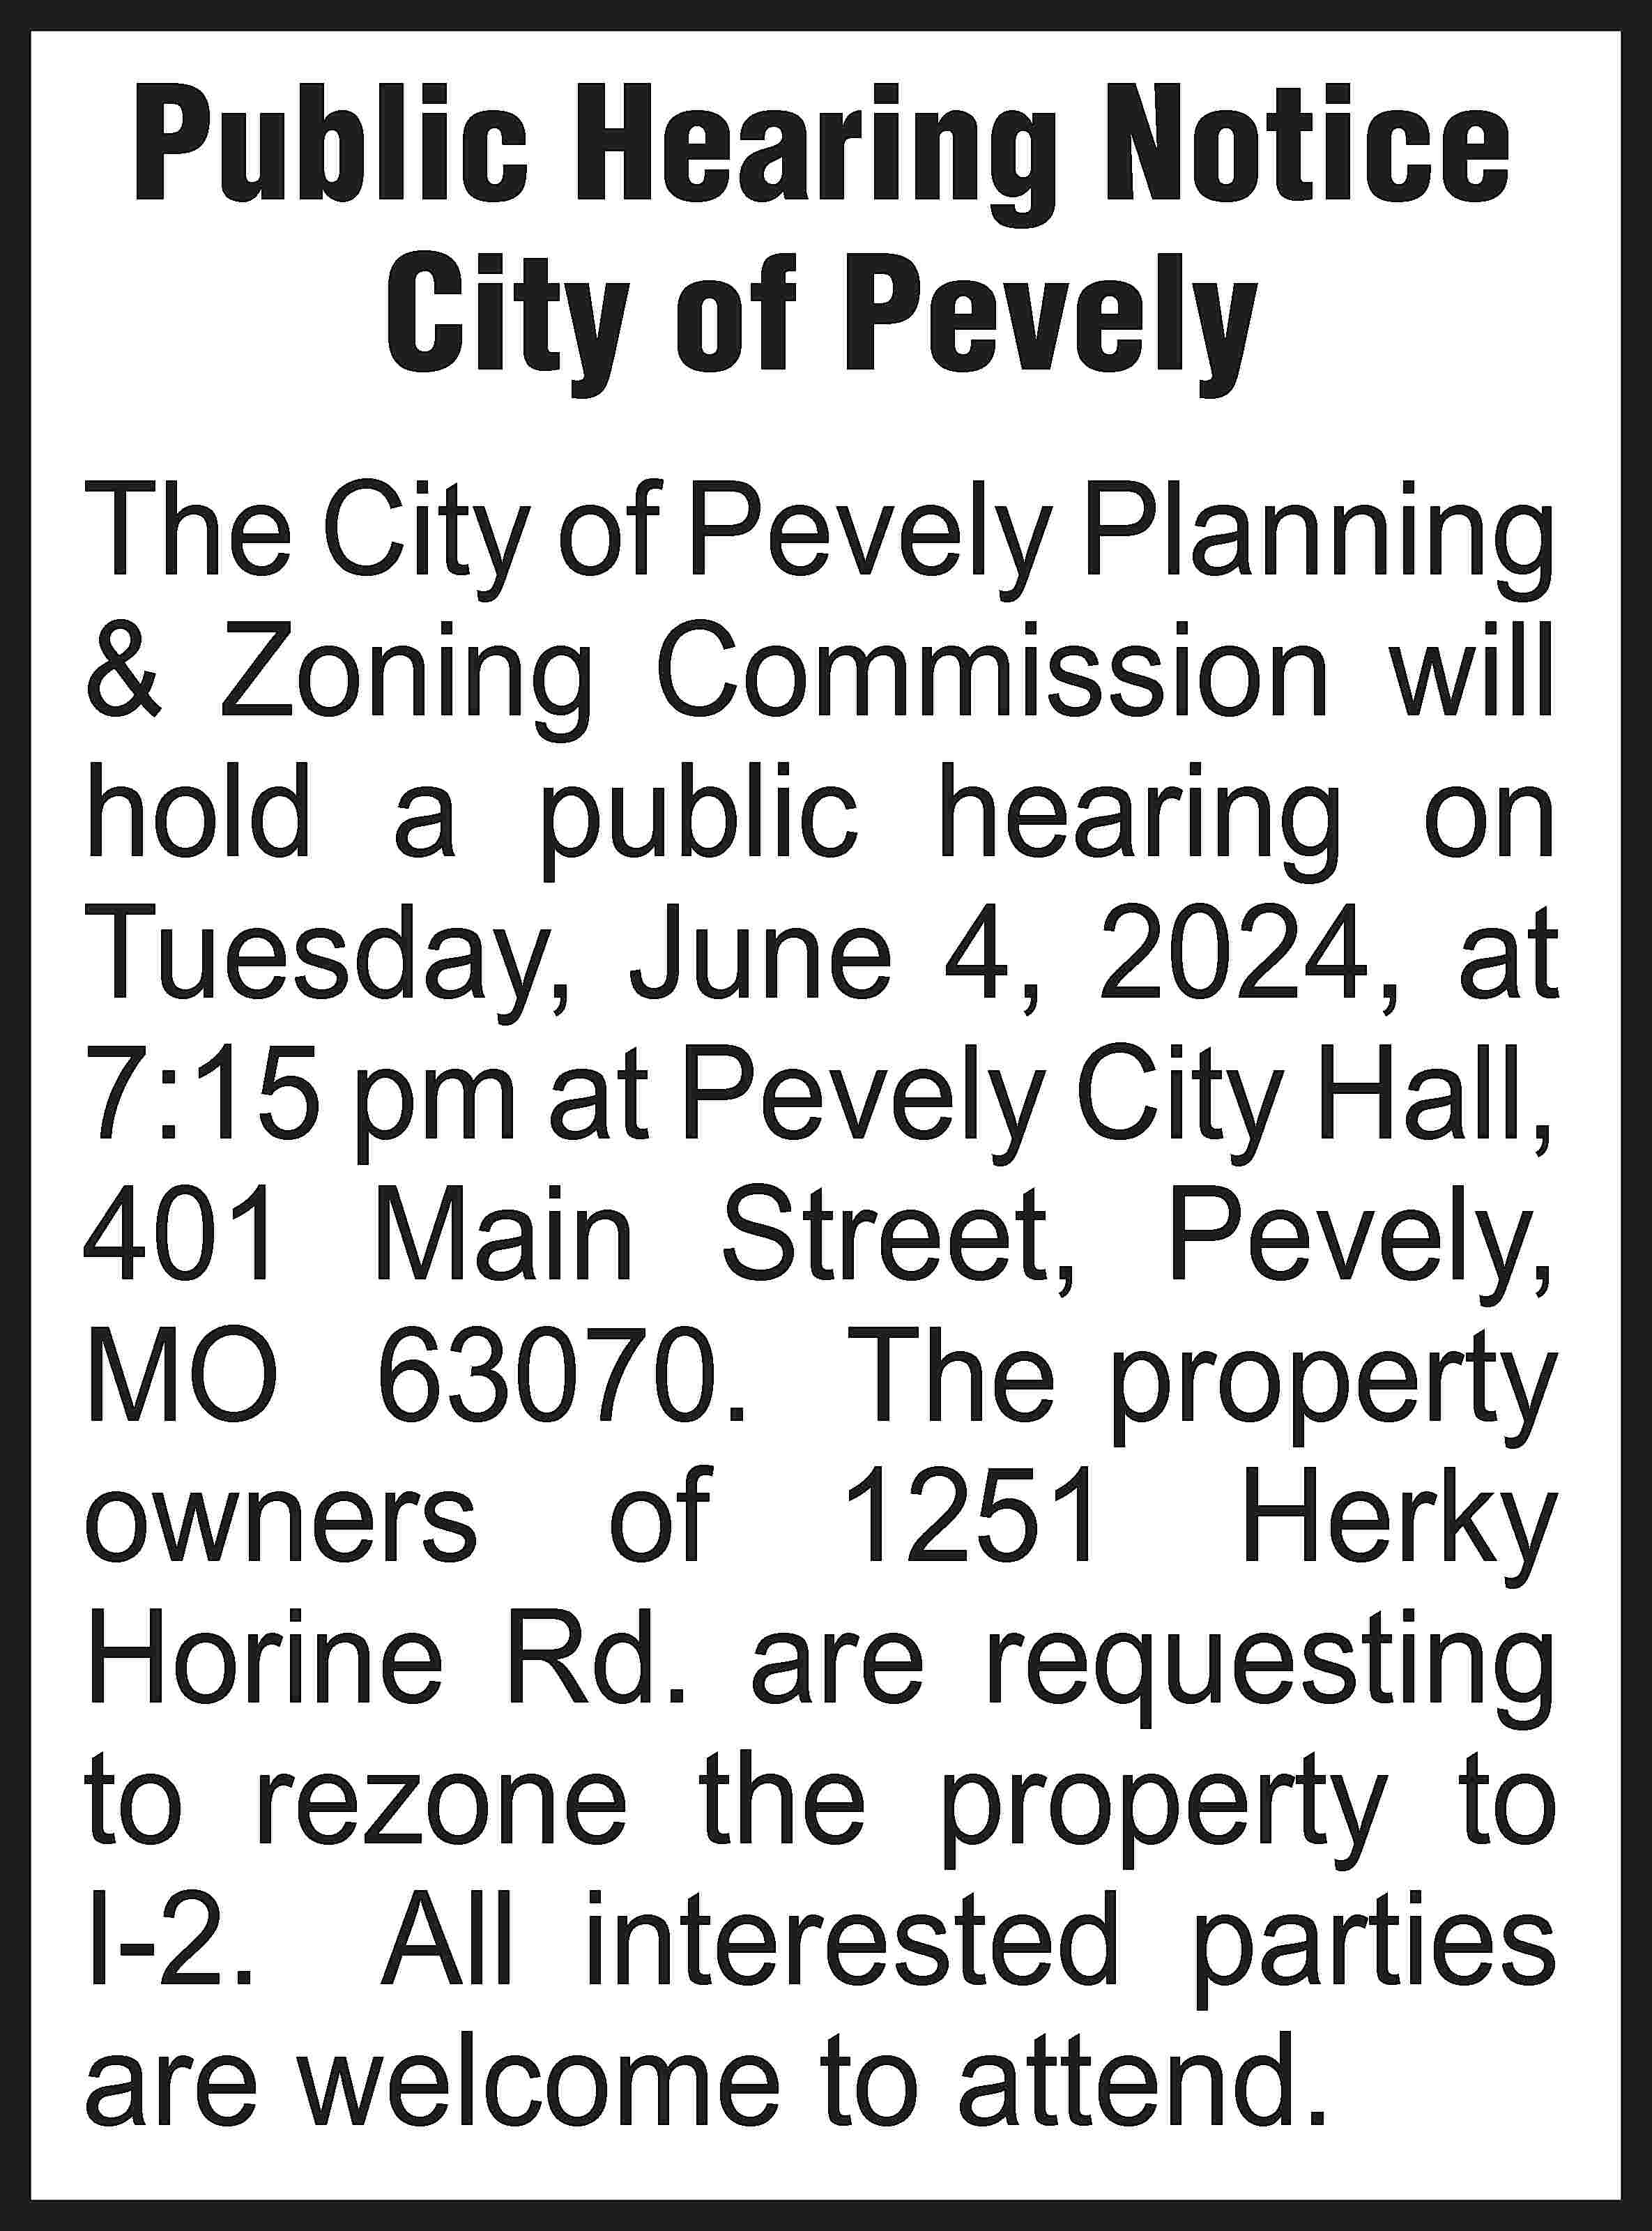 Public Hearing Notice City of  Public Hearing Notice City of Pevely The City of Pevely Planning & Zoning Commission will hold a public hearing on Tuesday, June 4, 2024, at 7:15 pm at Pevely City Hall, 401 Main Street, Pevely, MO 63070. The property owners of 1251 Herky Horine Rd. are requesting to rezone the property to I-2. All interested parties are welcome to attend.